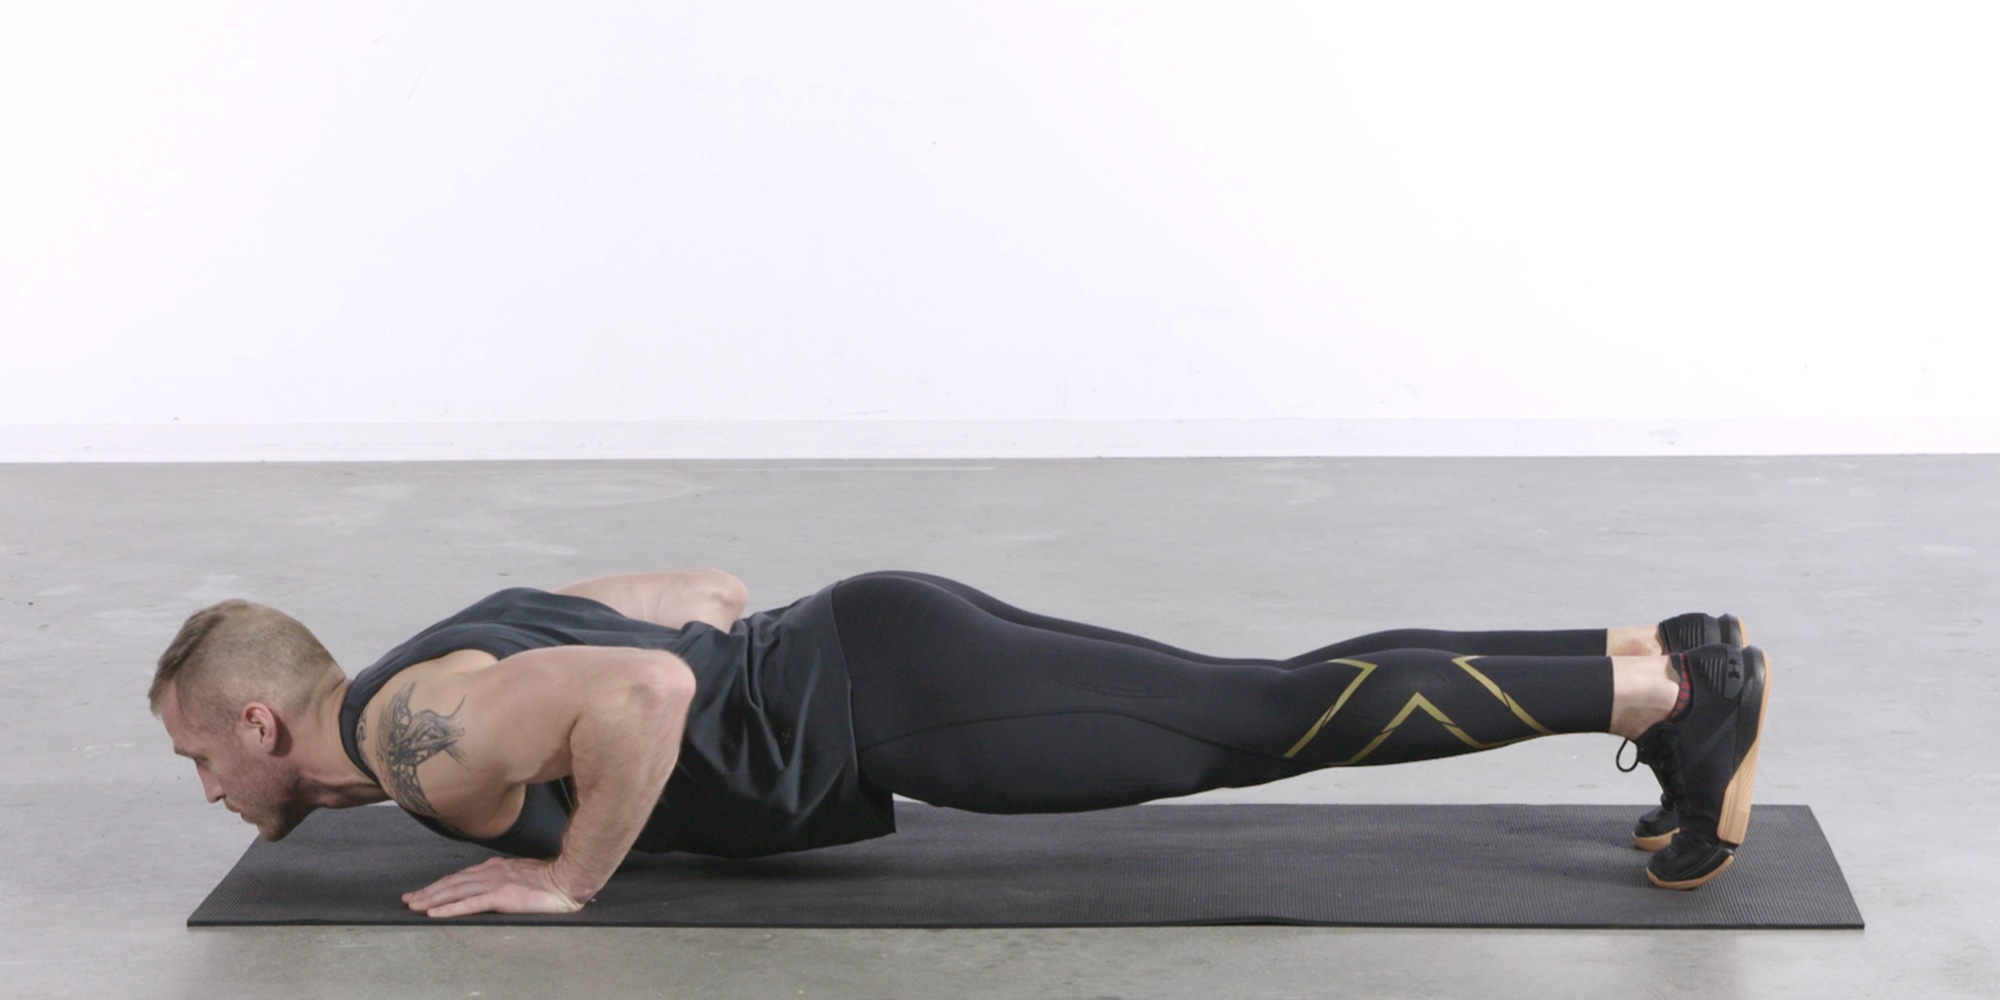 How To Do The Push-Up Properly